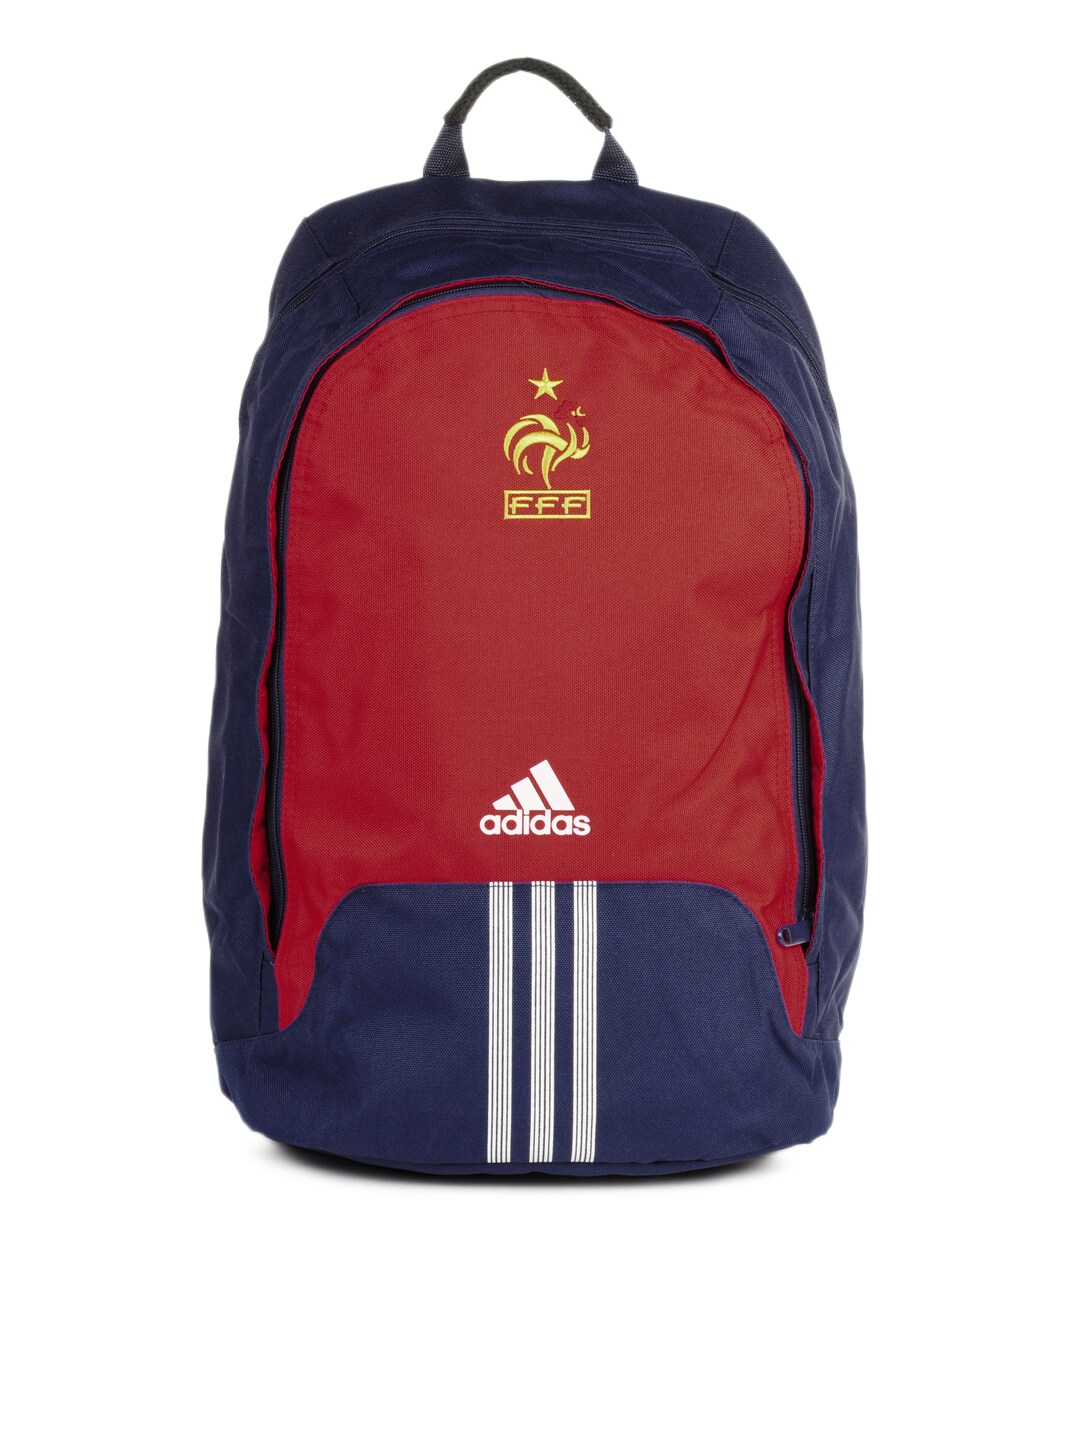 ADIDAS Men Blue And Red Back Pack